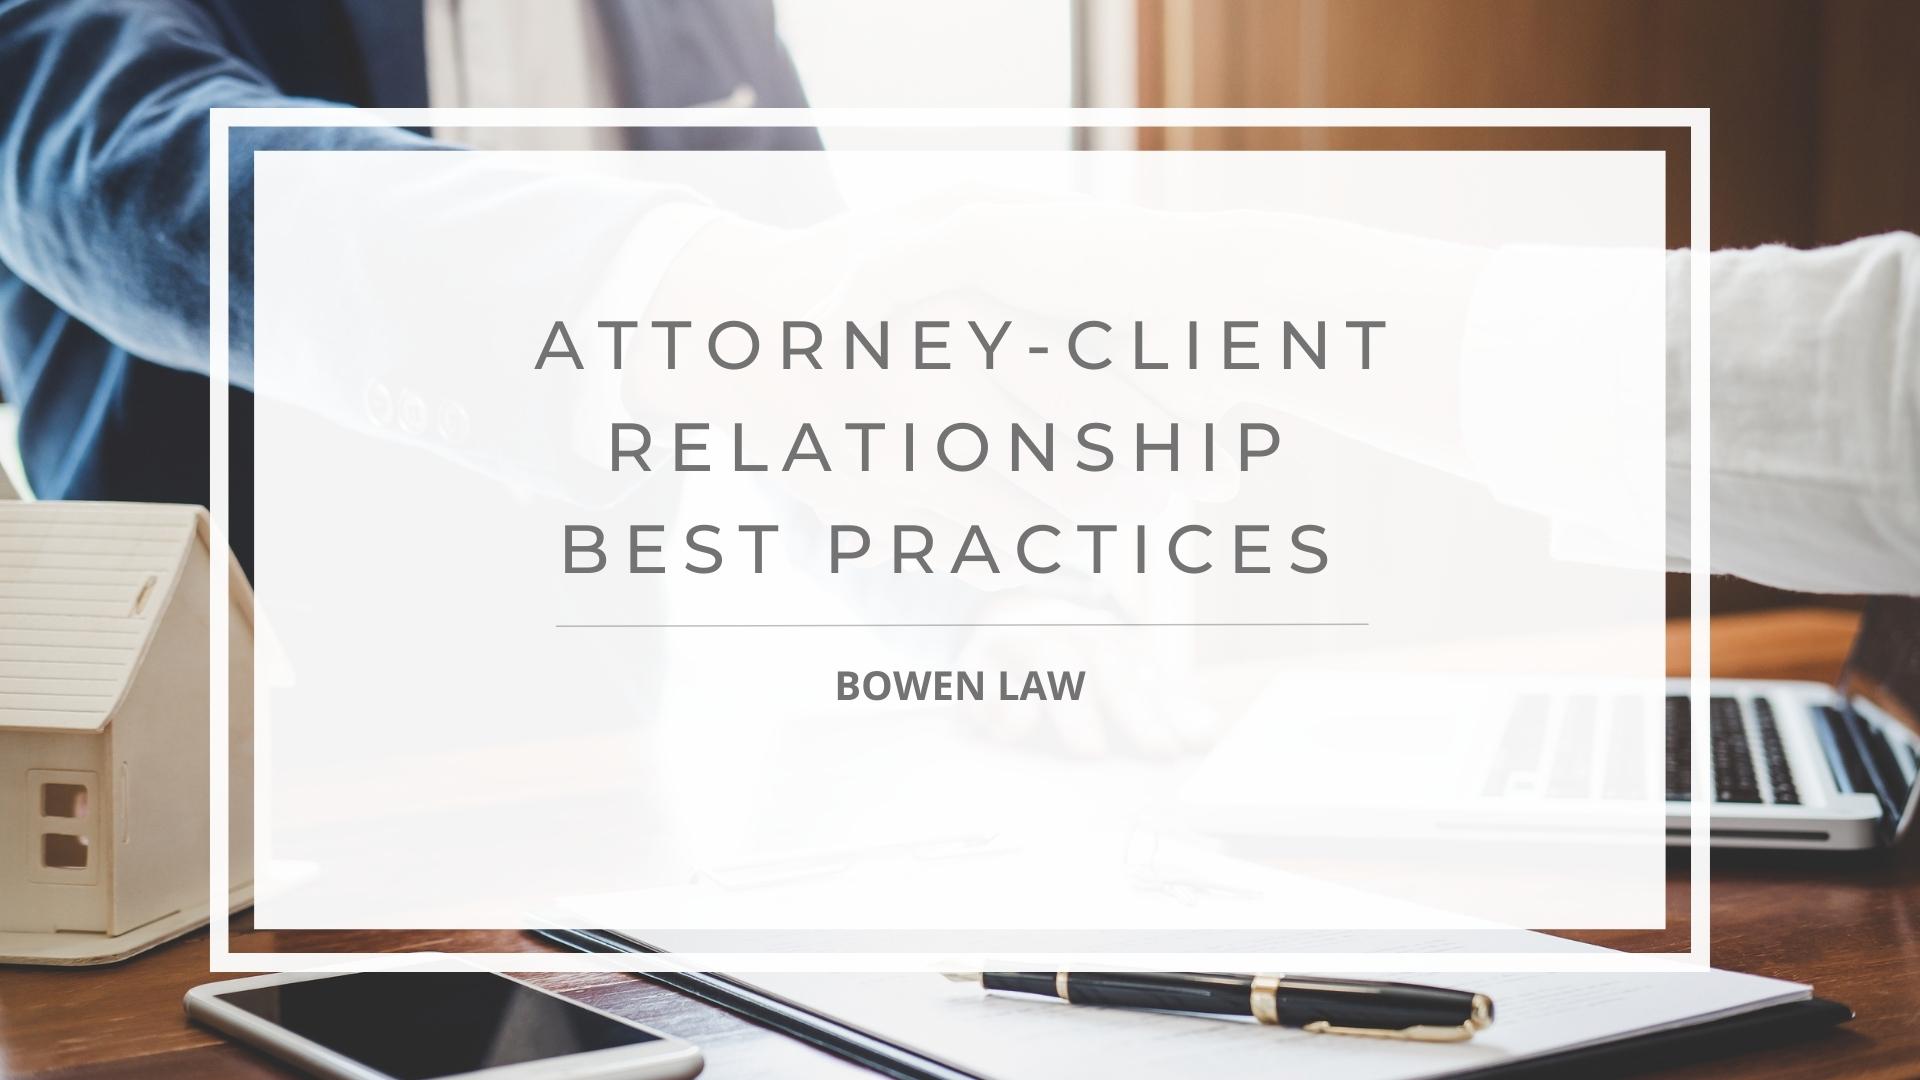 An attorney and client shaking hands overlaid with text: attorney-client relationship best practices